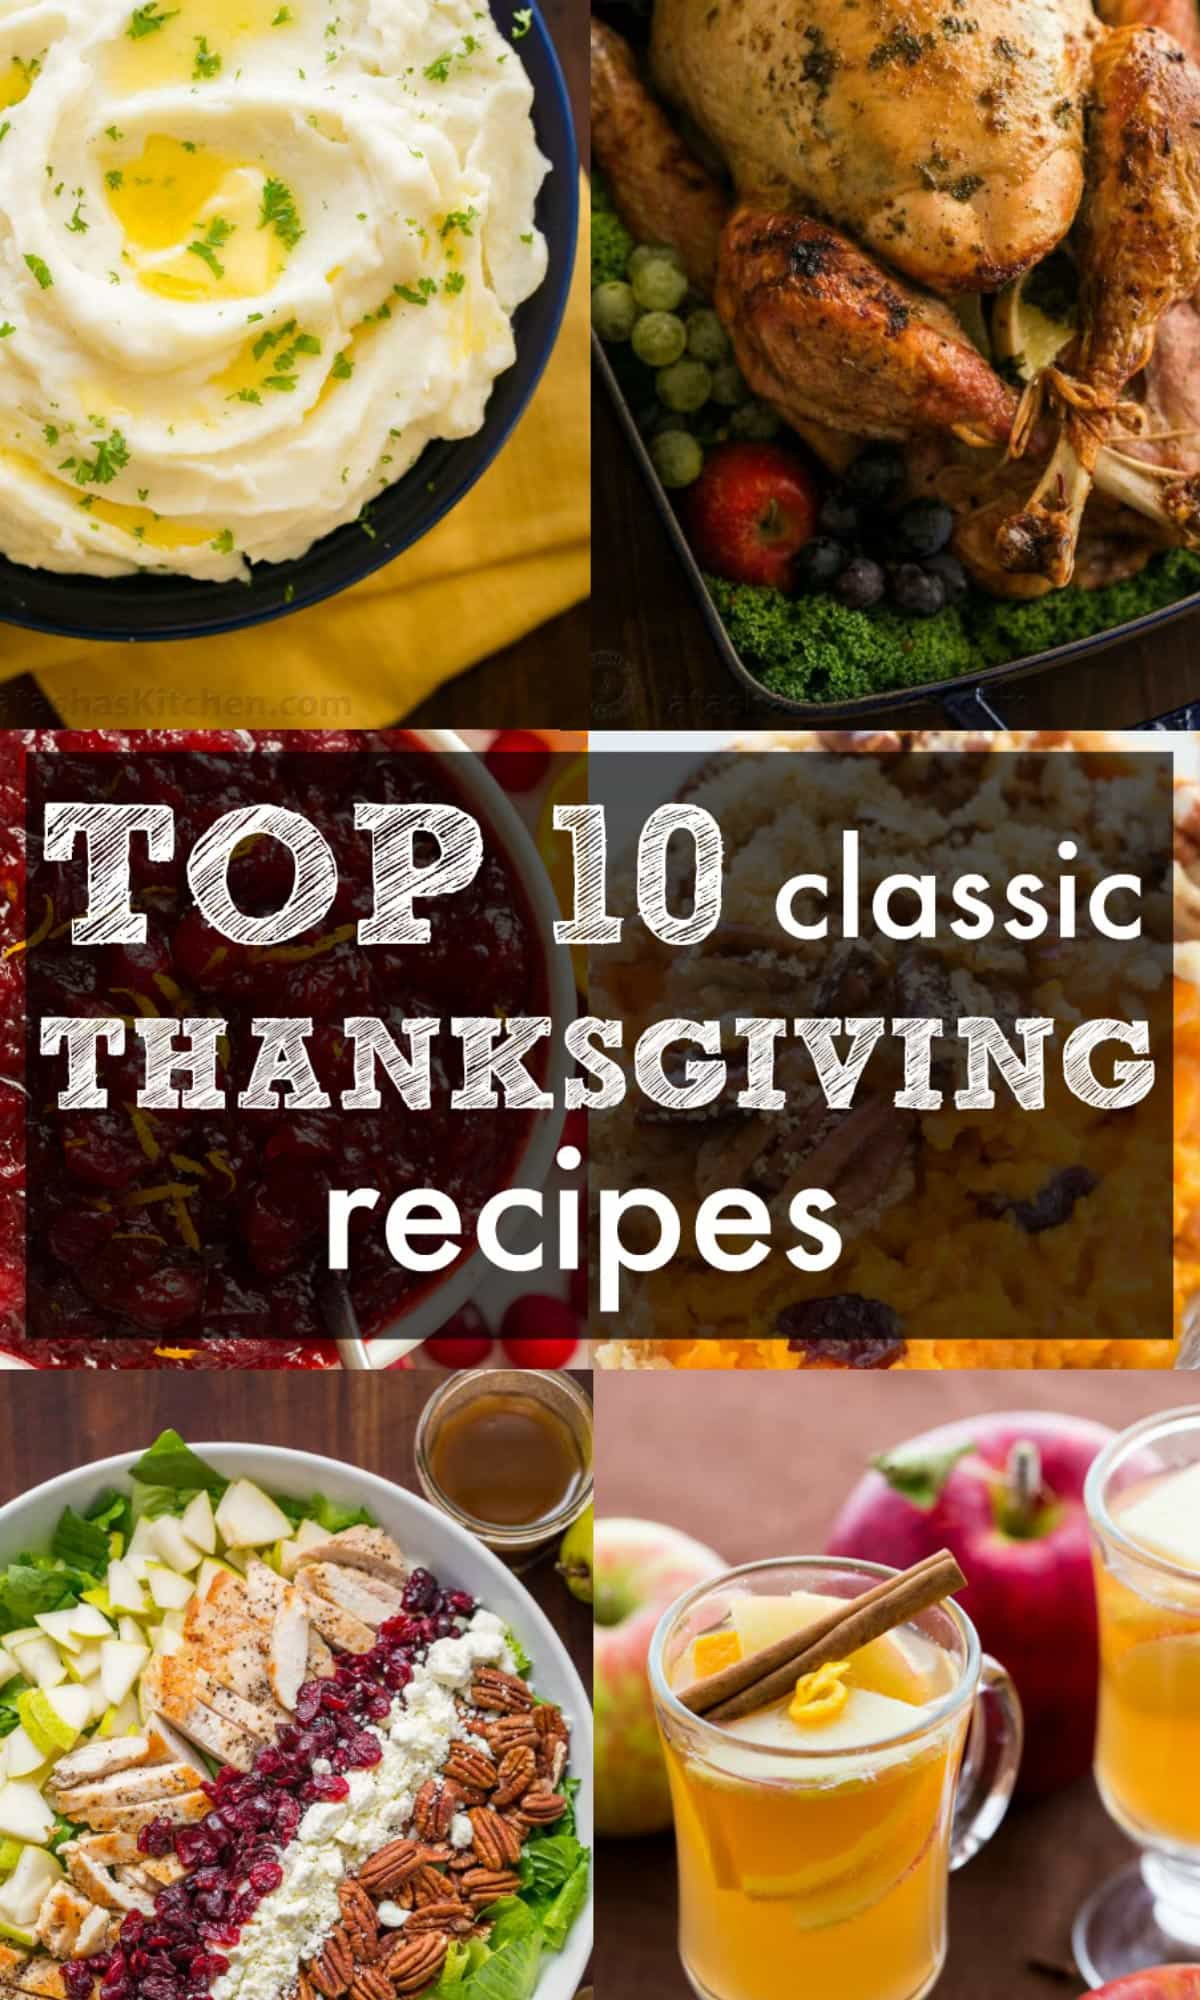 The Kitchen Thanksgiving Recipes
 Our Top 10 Classic Thanksgiving Recipes NatashasKitchen